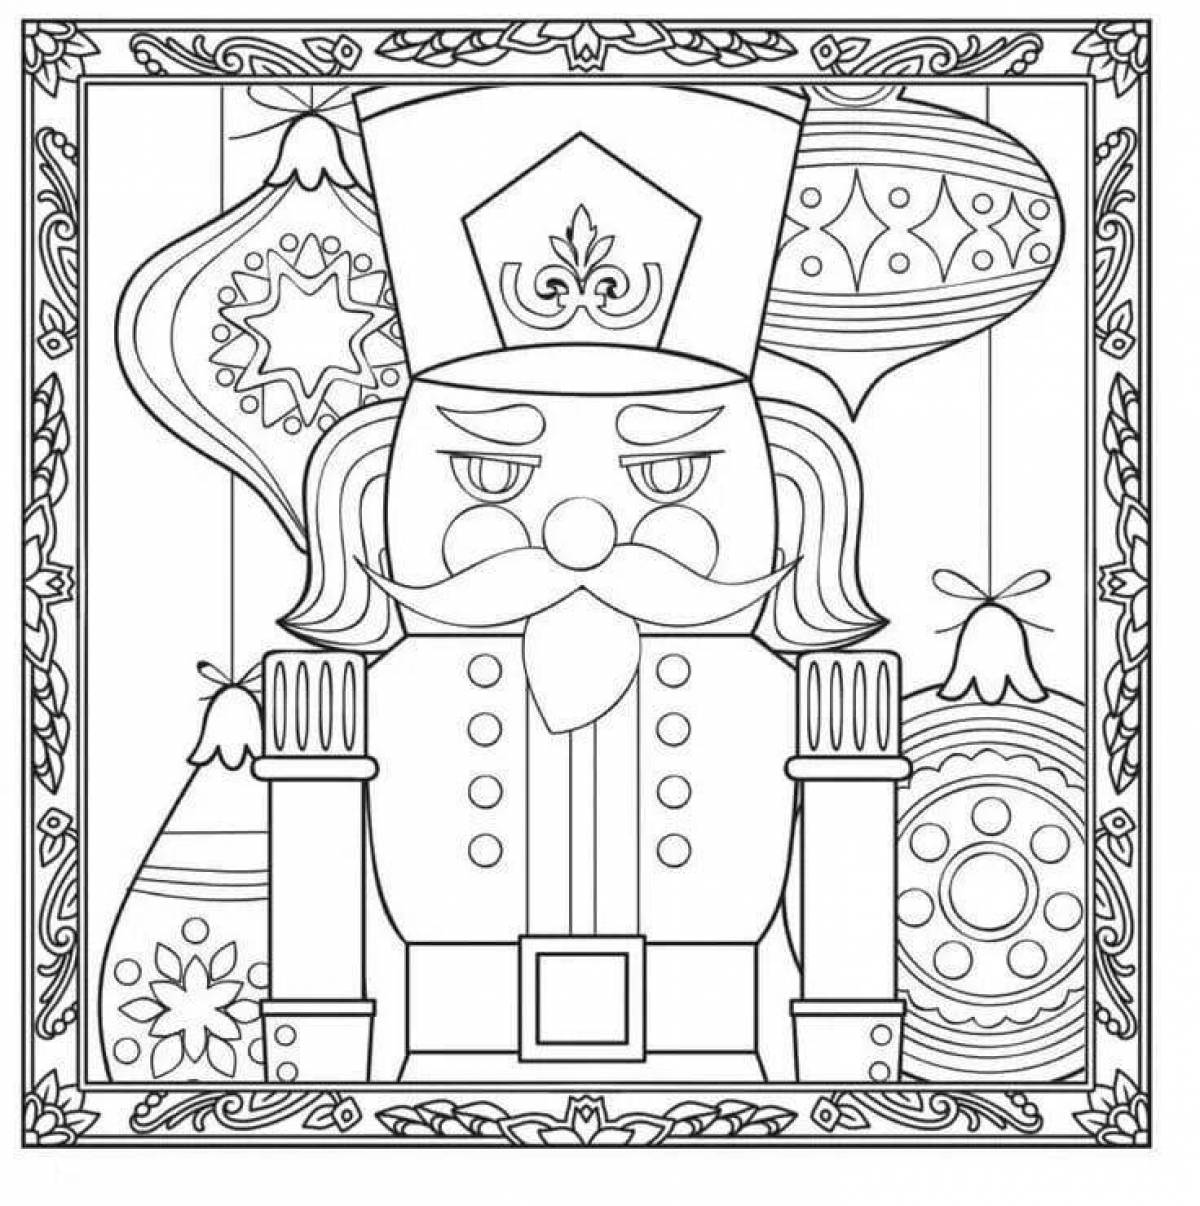 Coloring page charming nutcracker and mouse king